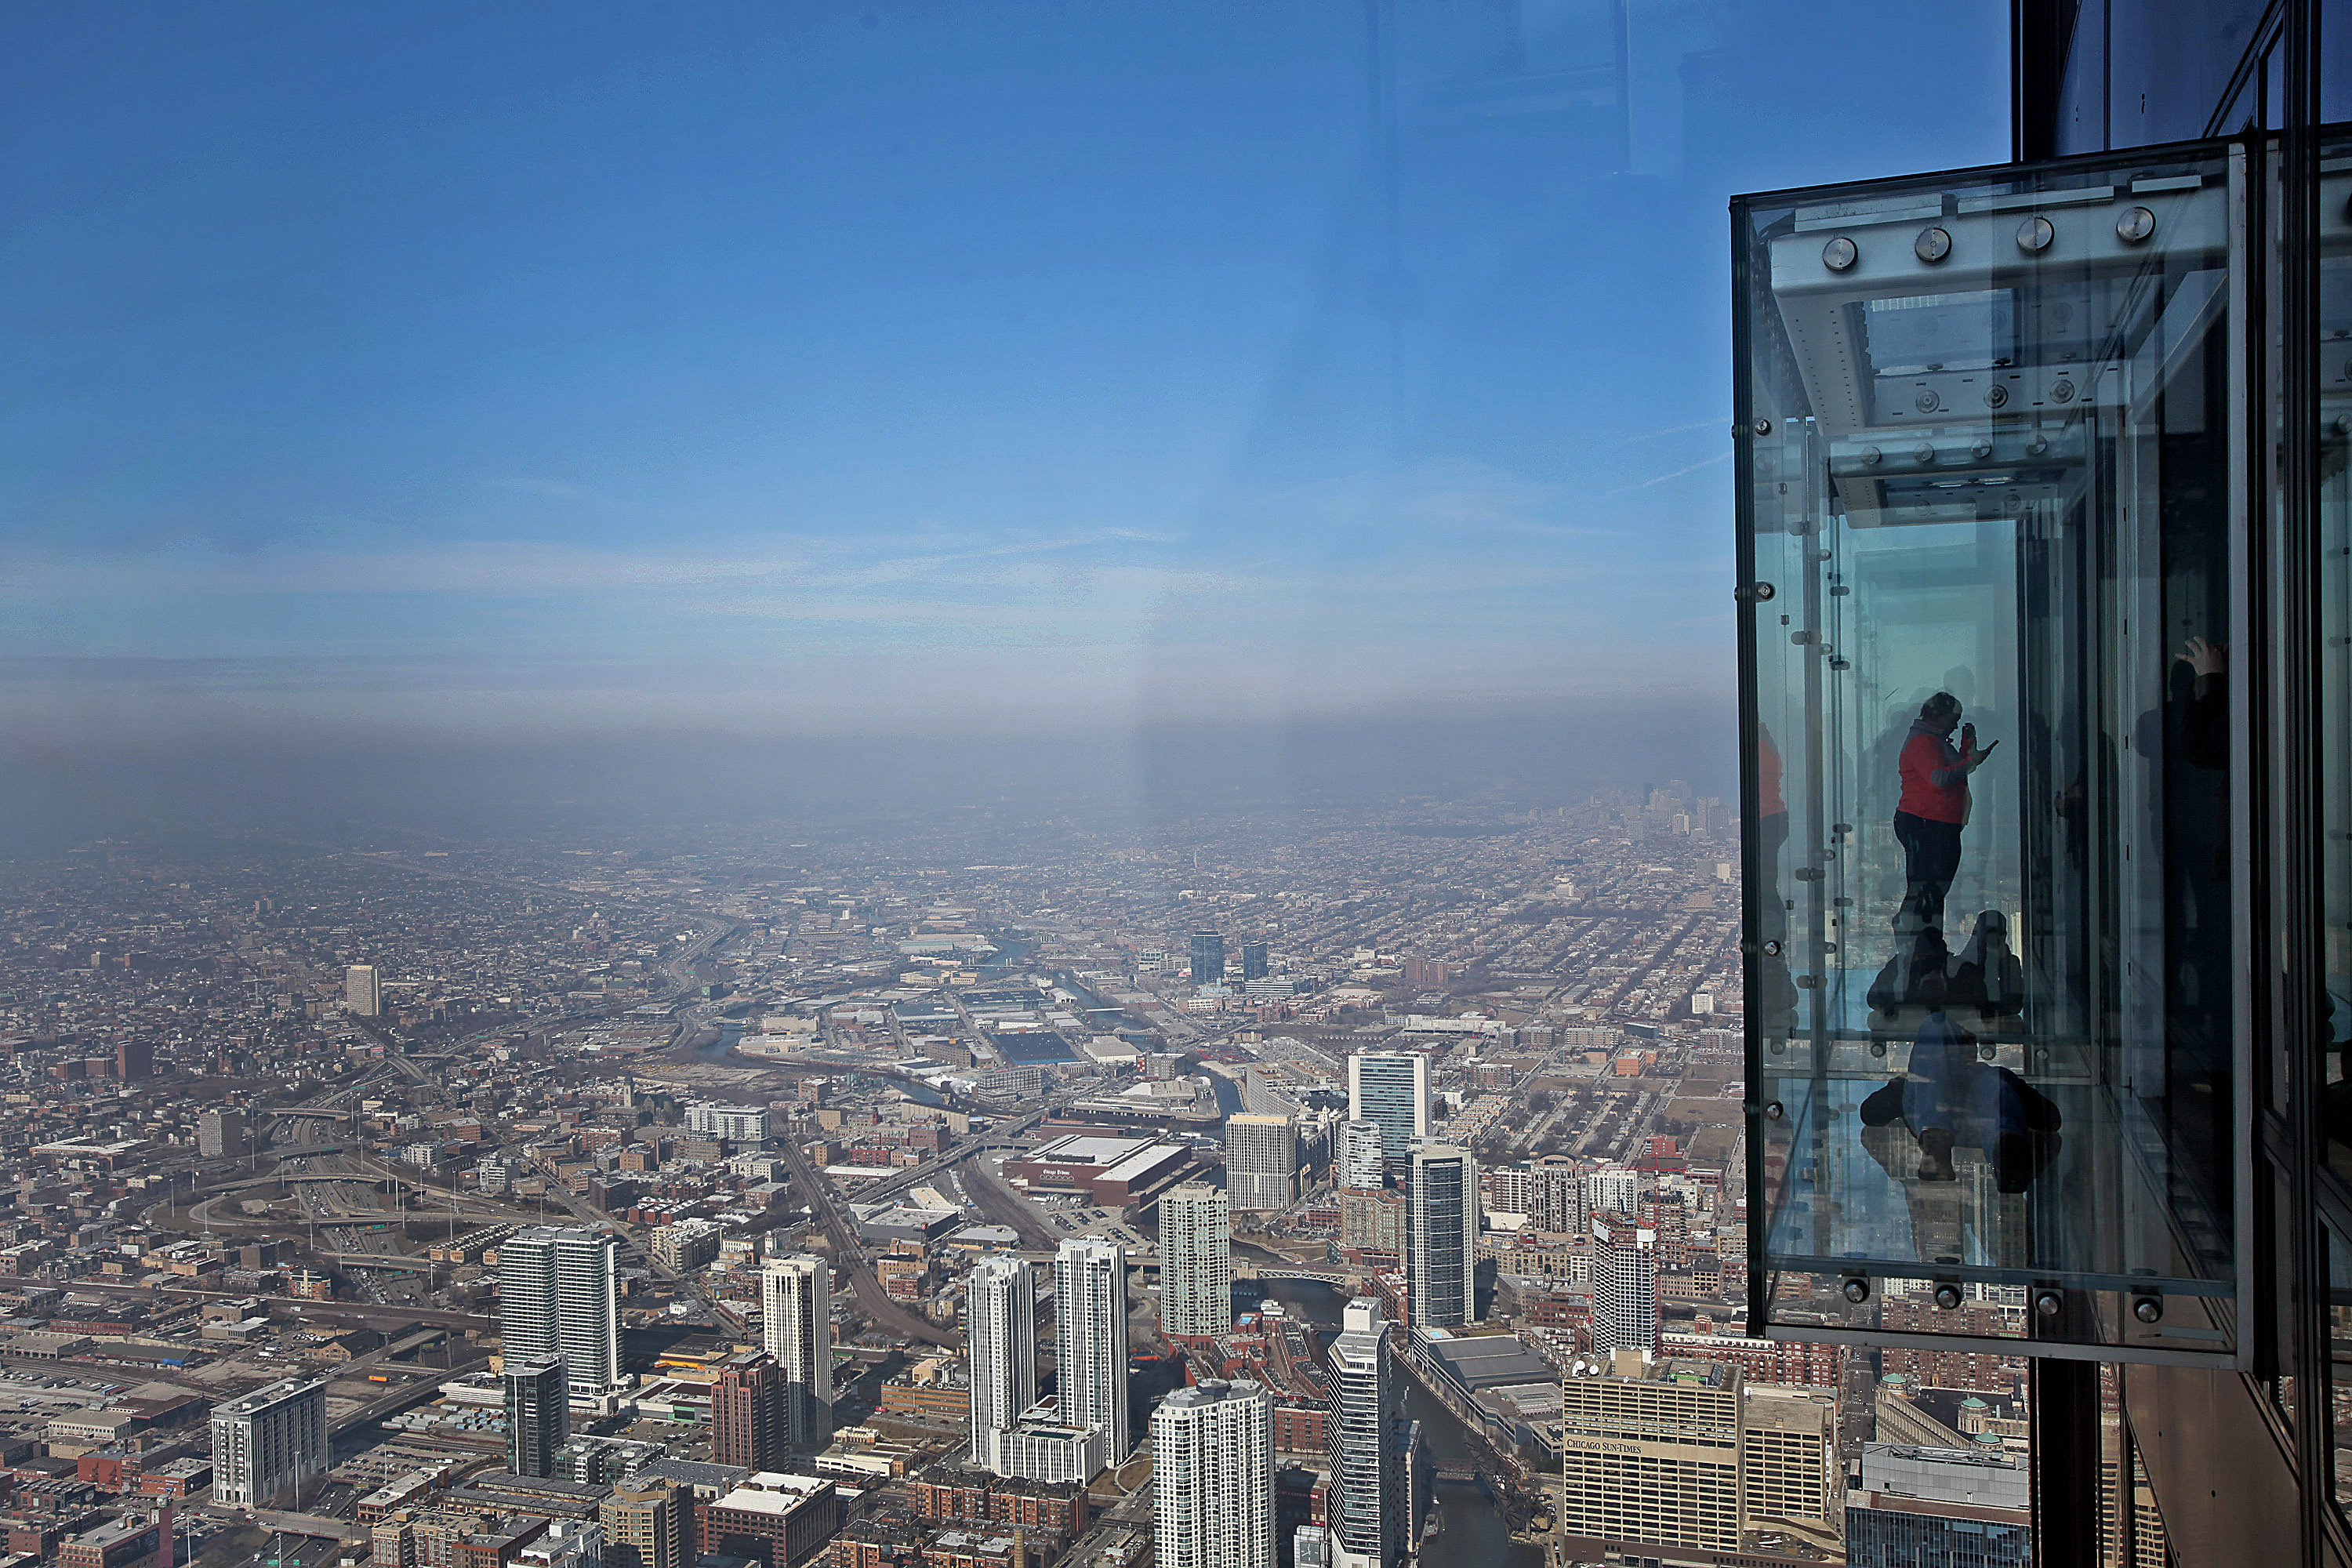 Visitors stand on the glass balcony at the skydeck of the Willis Tower in Chicago, Illinois, U.S., on Wednesday, Feb. 13, 2013. (Bloomberg/Getty Images)